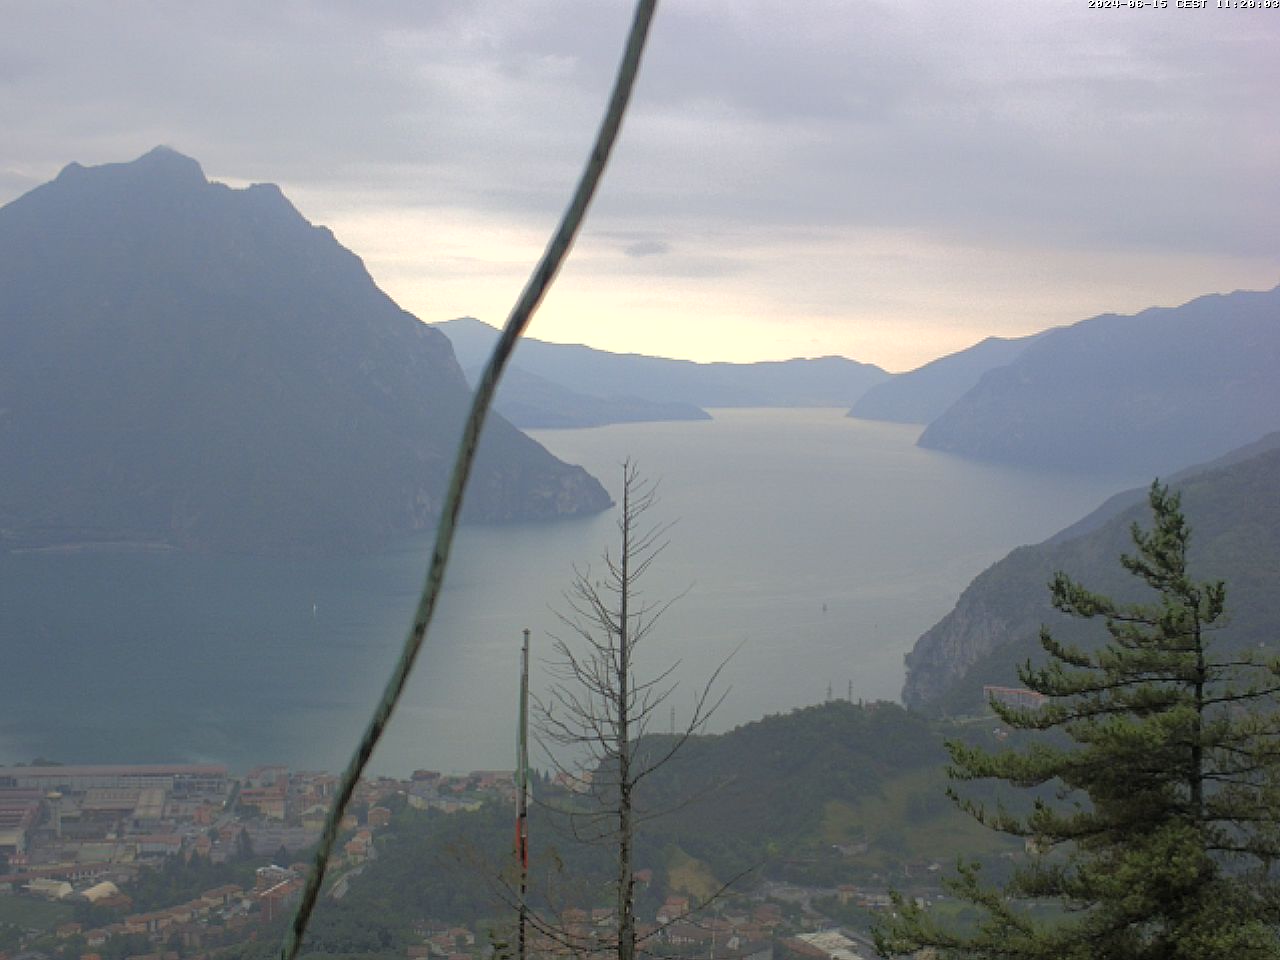 Lovere (Lac d'Iseo) Me. 11:29